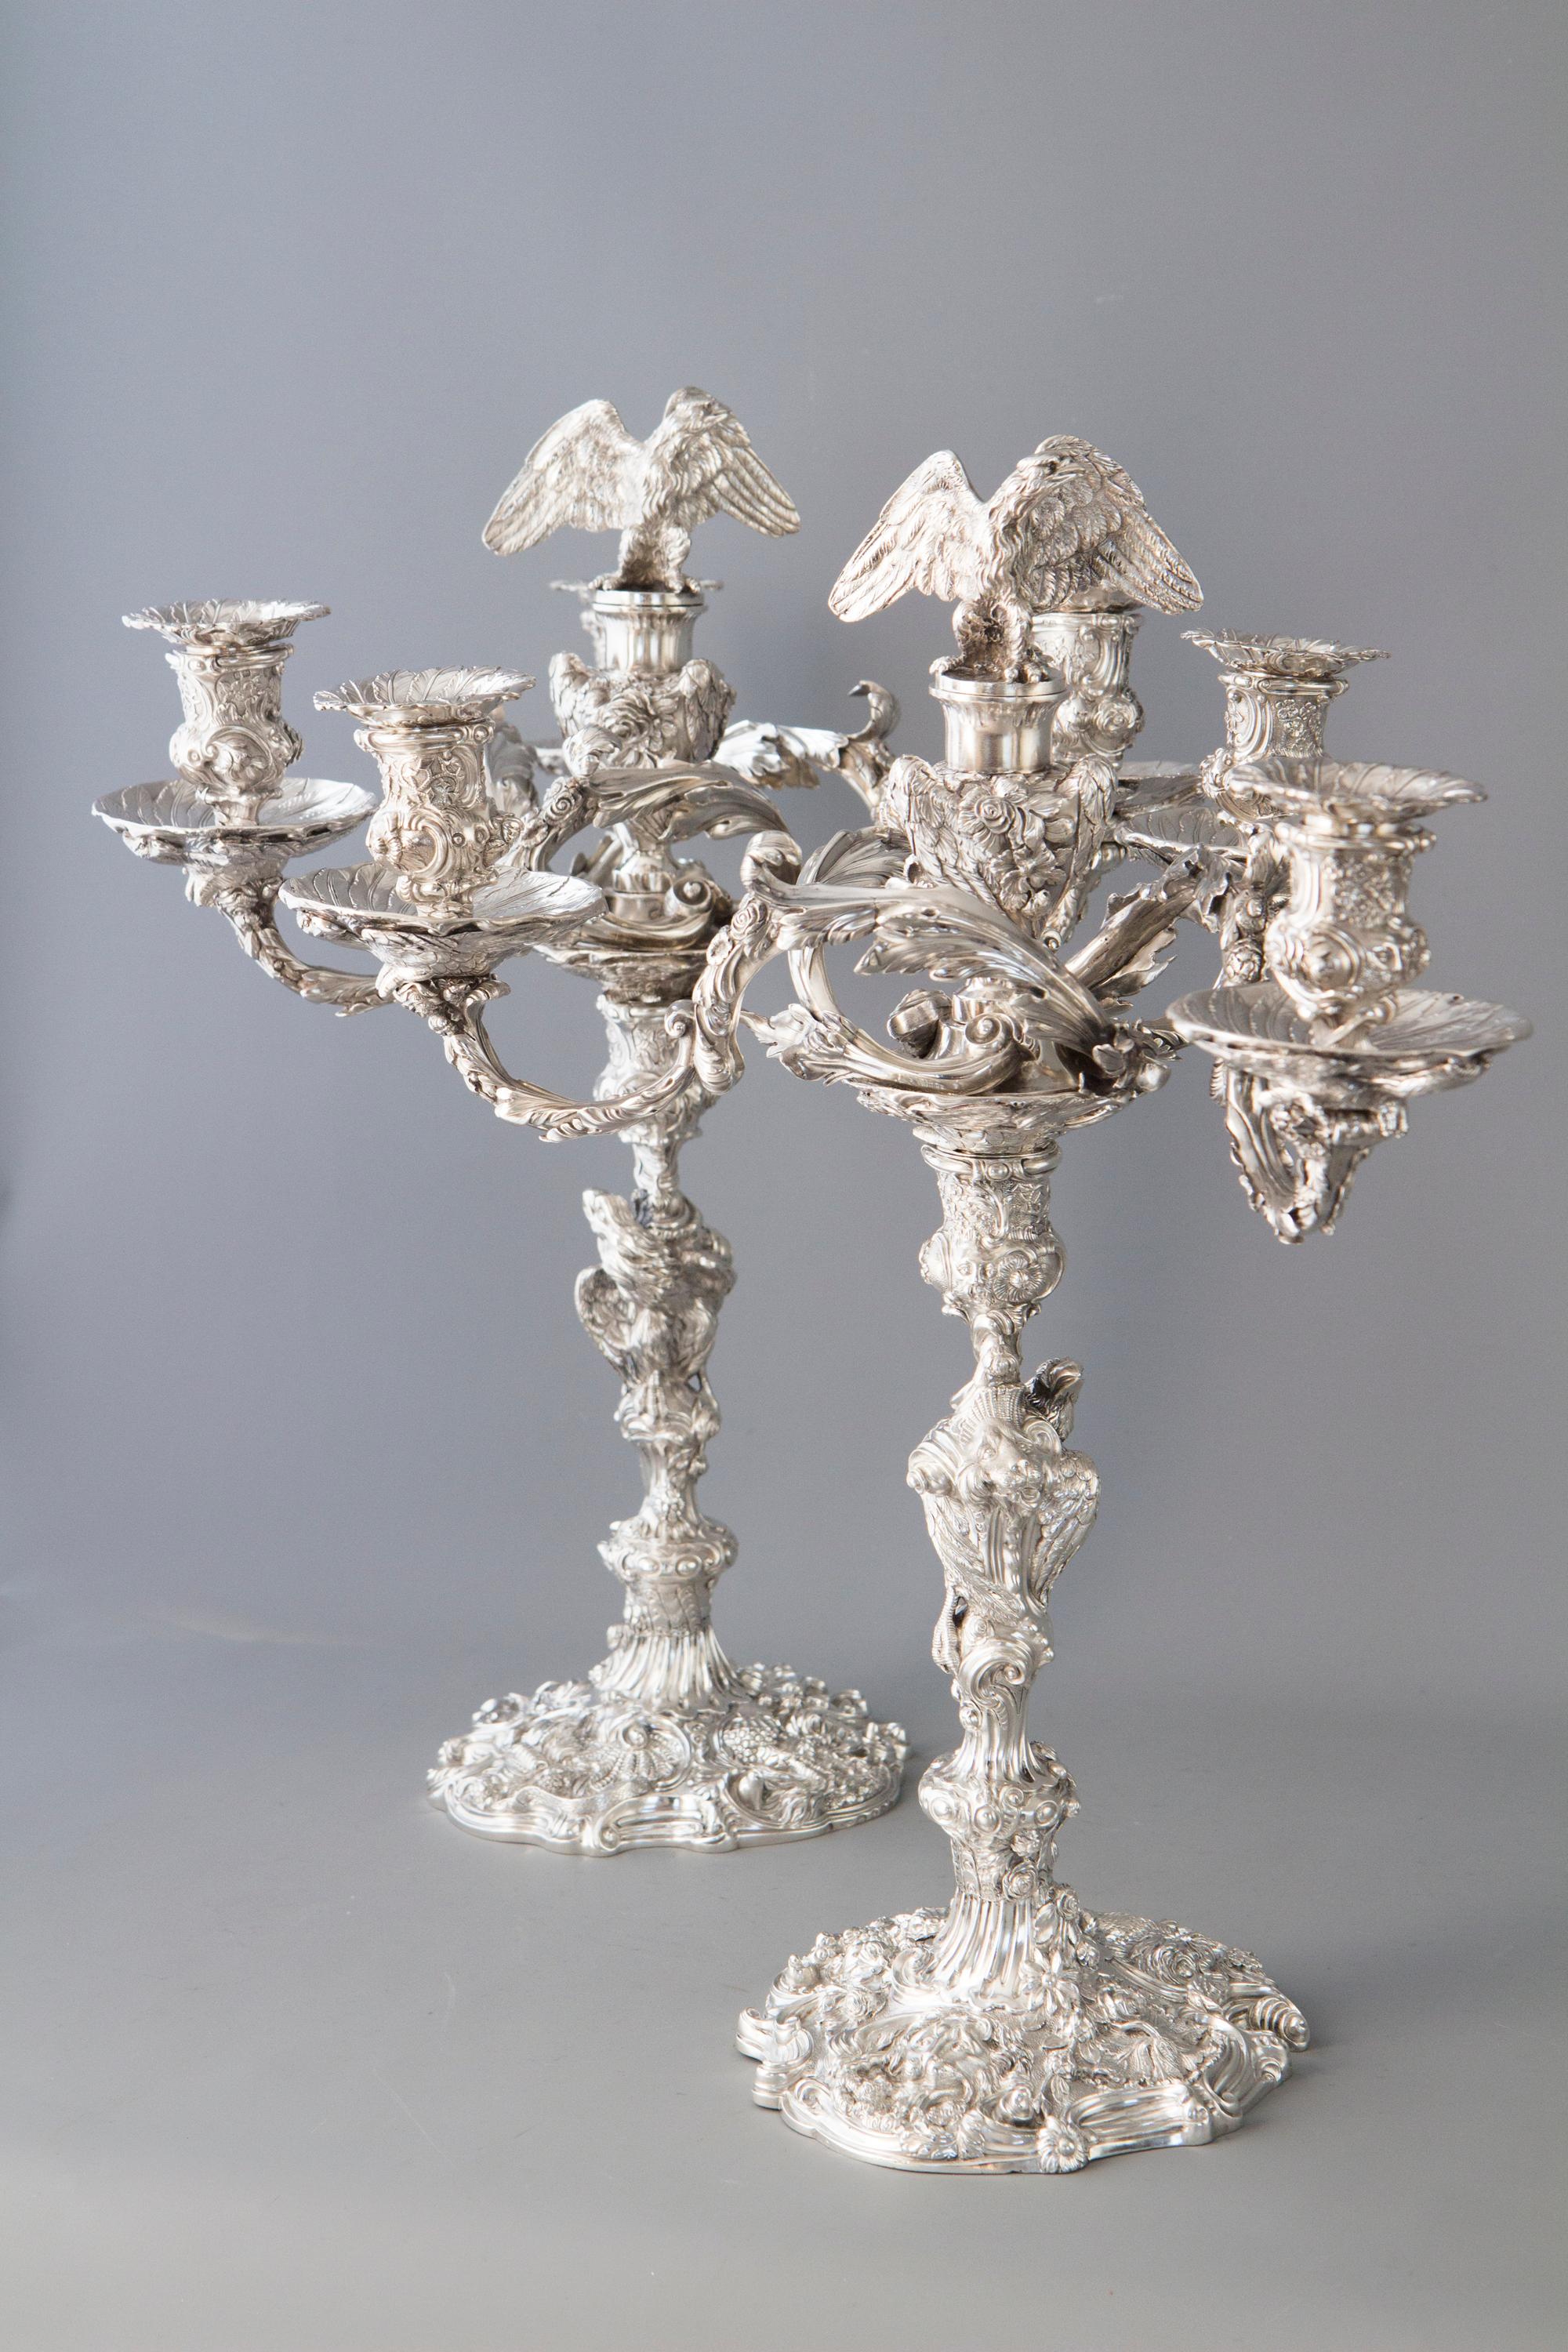 George III Impressive Pair of Cast Silver Four-Light Candelabra, London 1812 by W Pitts